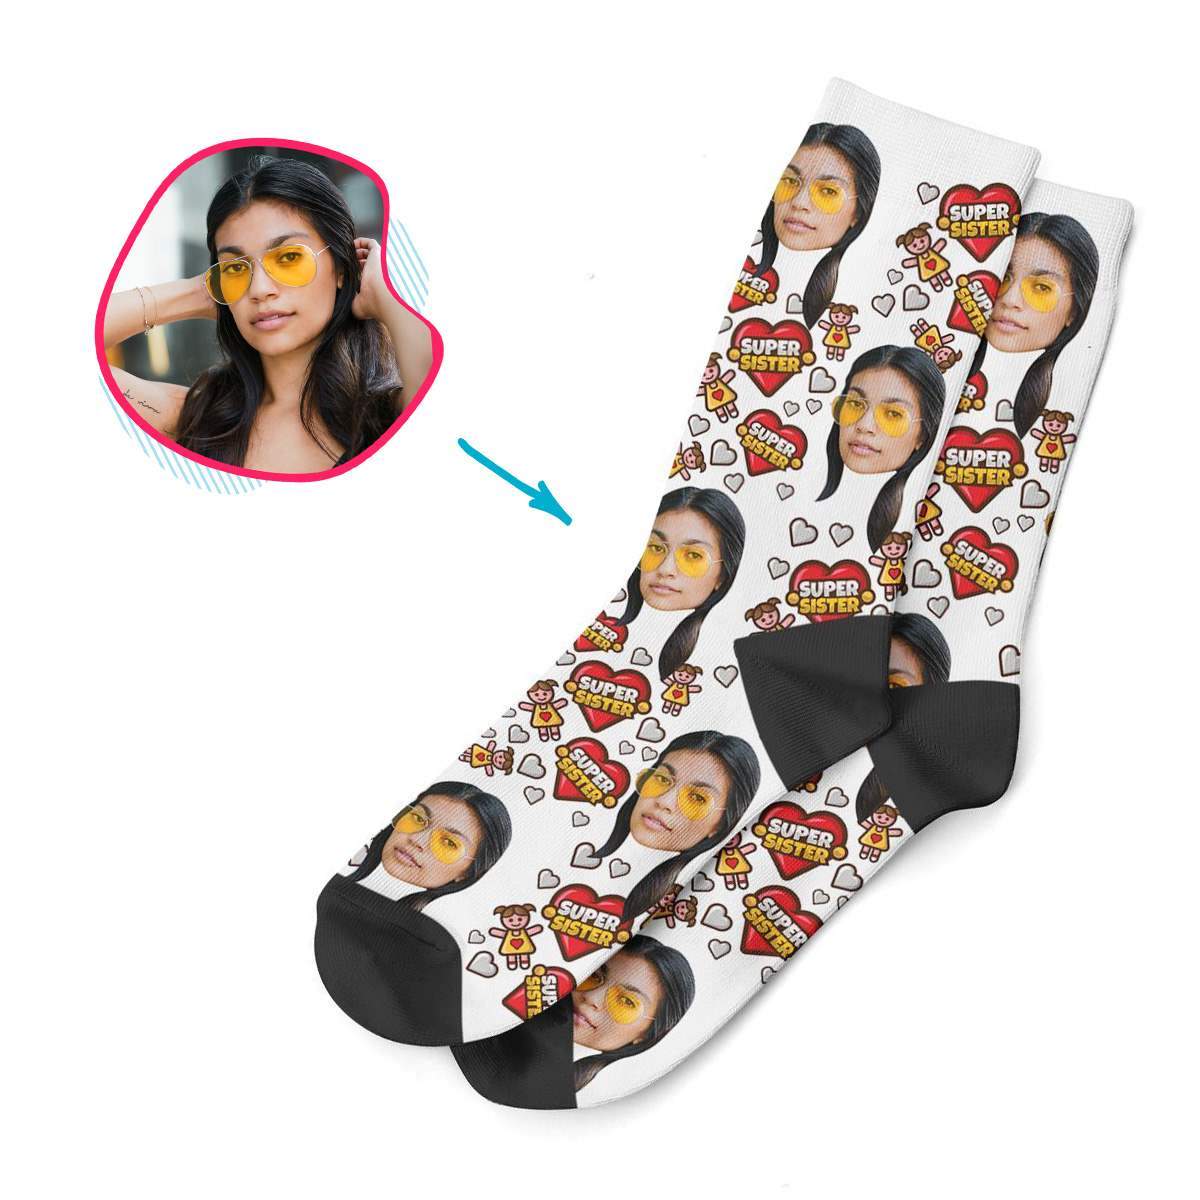 dark Super Sister socks personalized with photo of face printed on them